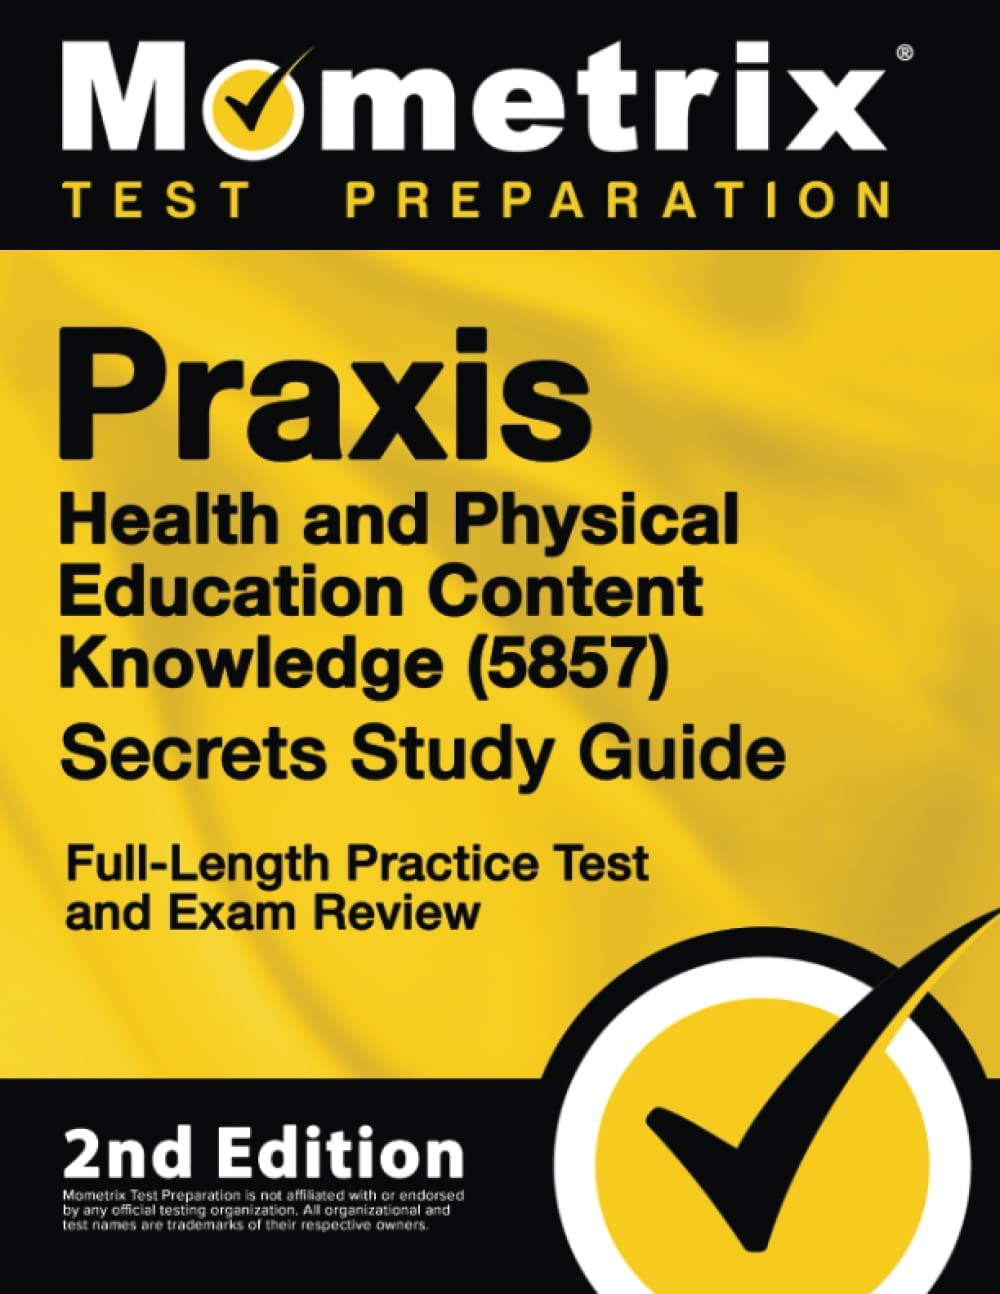 Praxis Health and Physical Education Content Knowledge 5857 Secrets Study Guide – Full-Length Practice Test and Exam Review